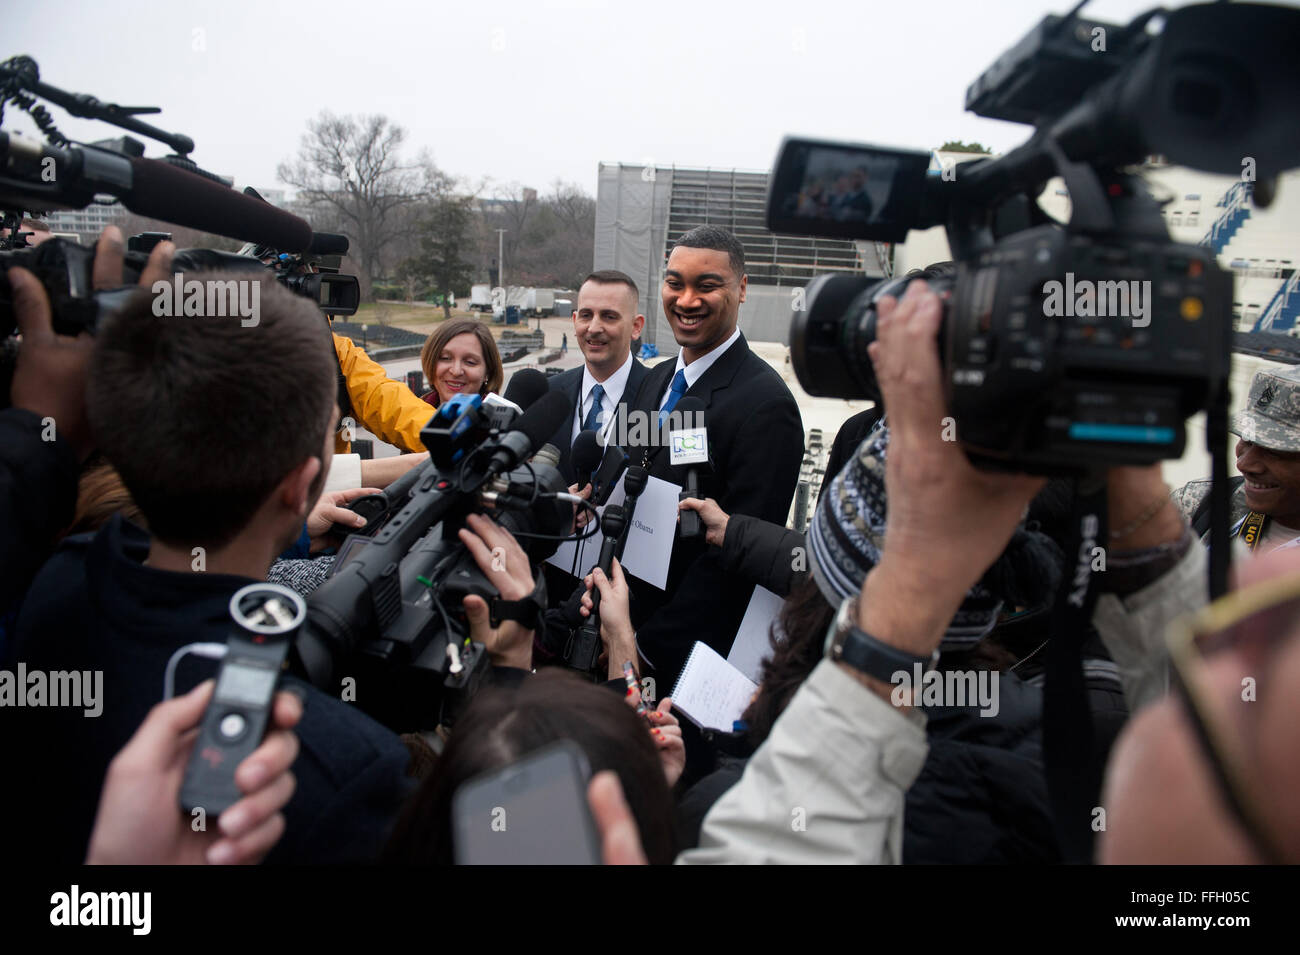 Air Force Staff Sgt. Serpico Elliott, a stand-in for President Barrack Obama, talks with the media after the presidential inauguration swearing-in rehearsal in Washington, D.C. Stock Photo